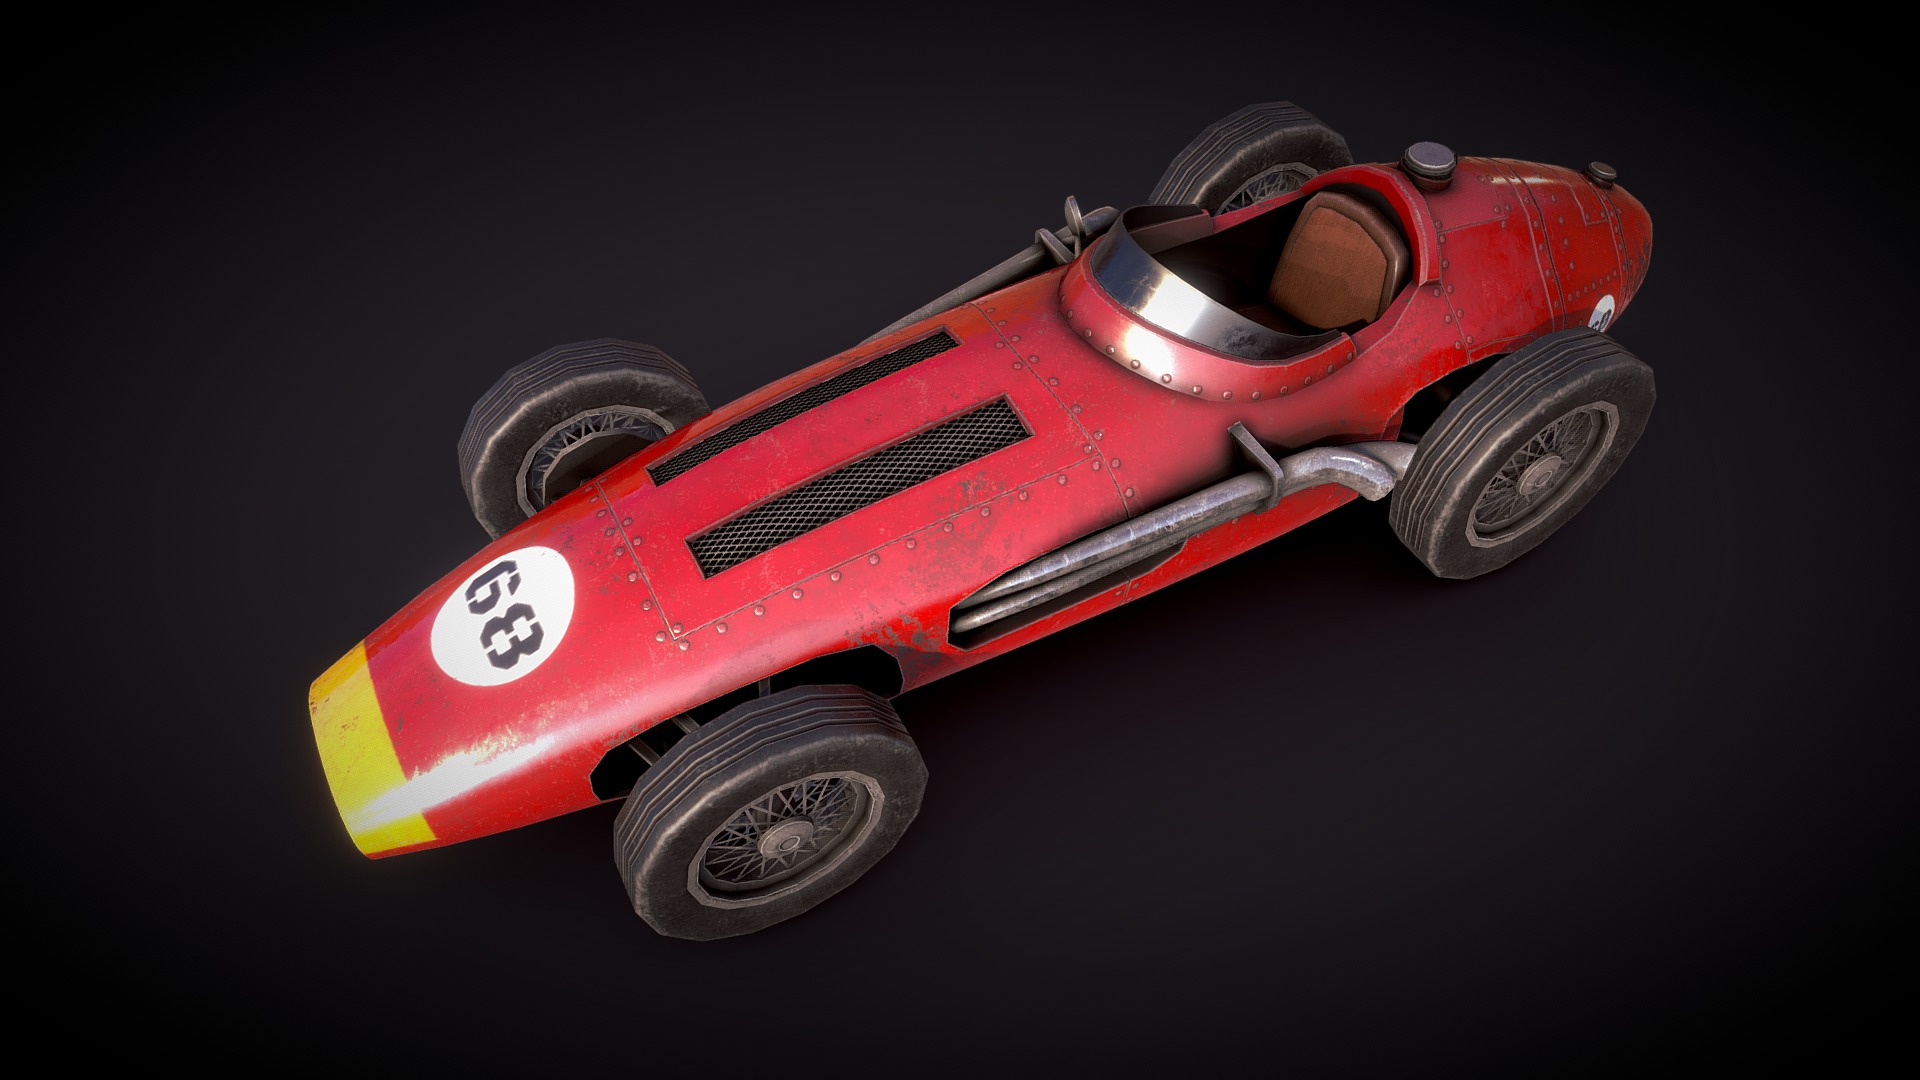 3D model Classic F1 – LowPoly Challenge - This is a 3D model of the Classic F1 - LowPoly Challenge. The 3D model is about a red toy car.